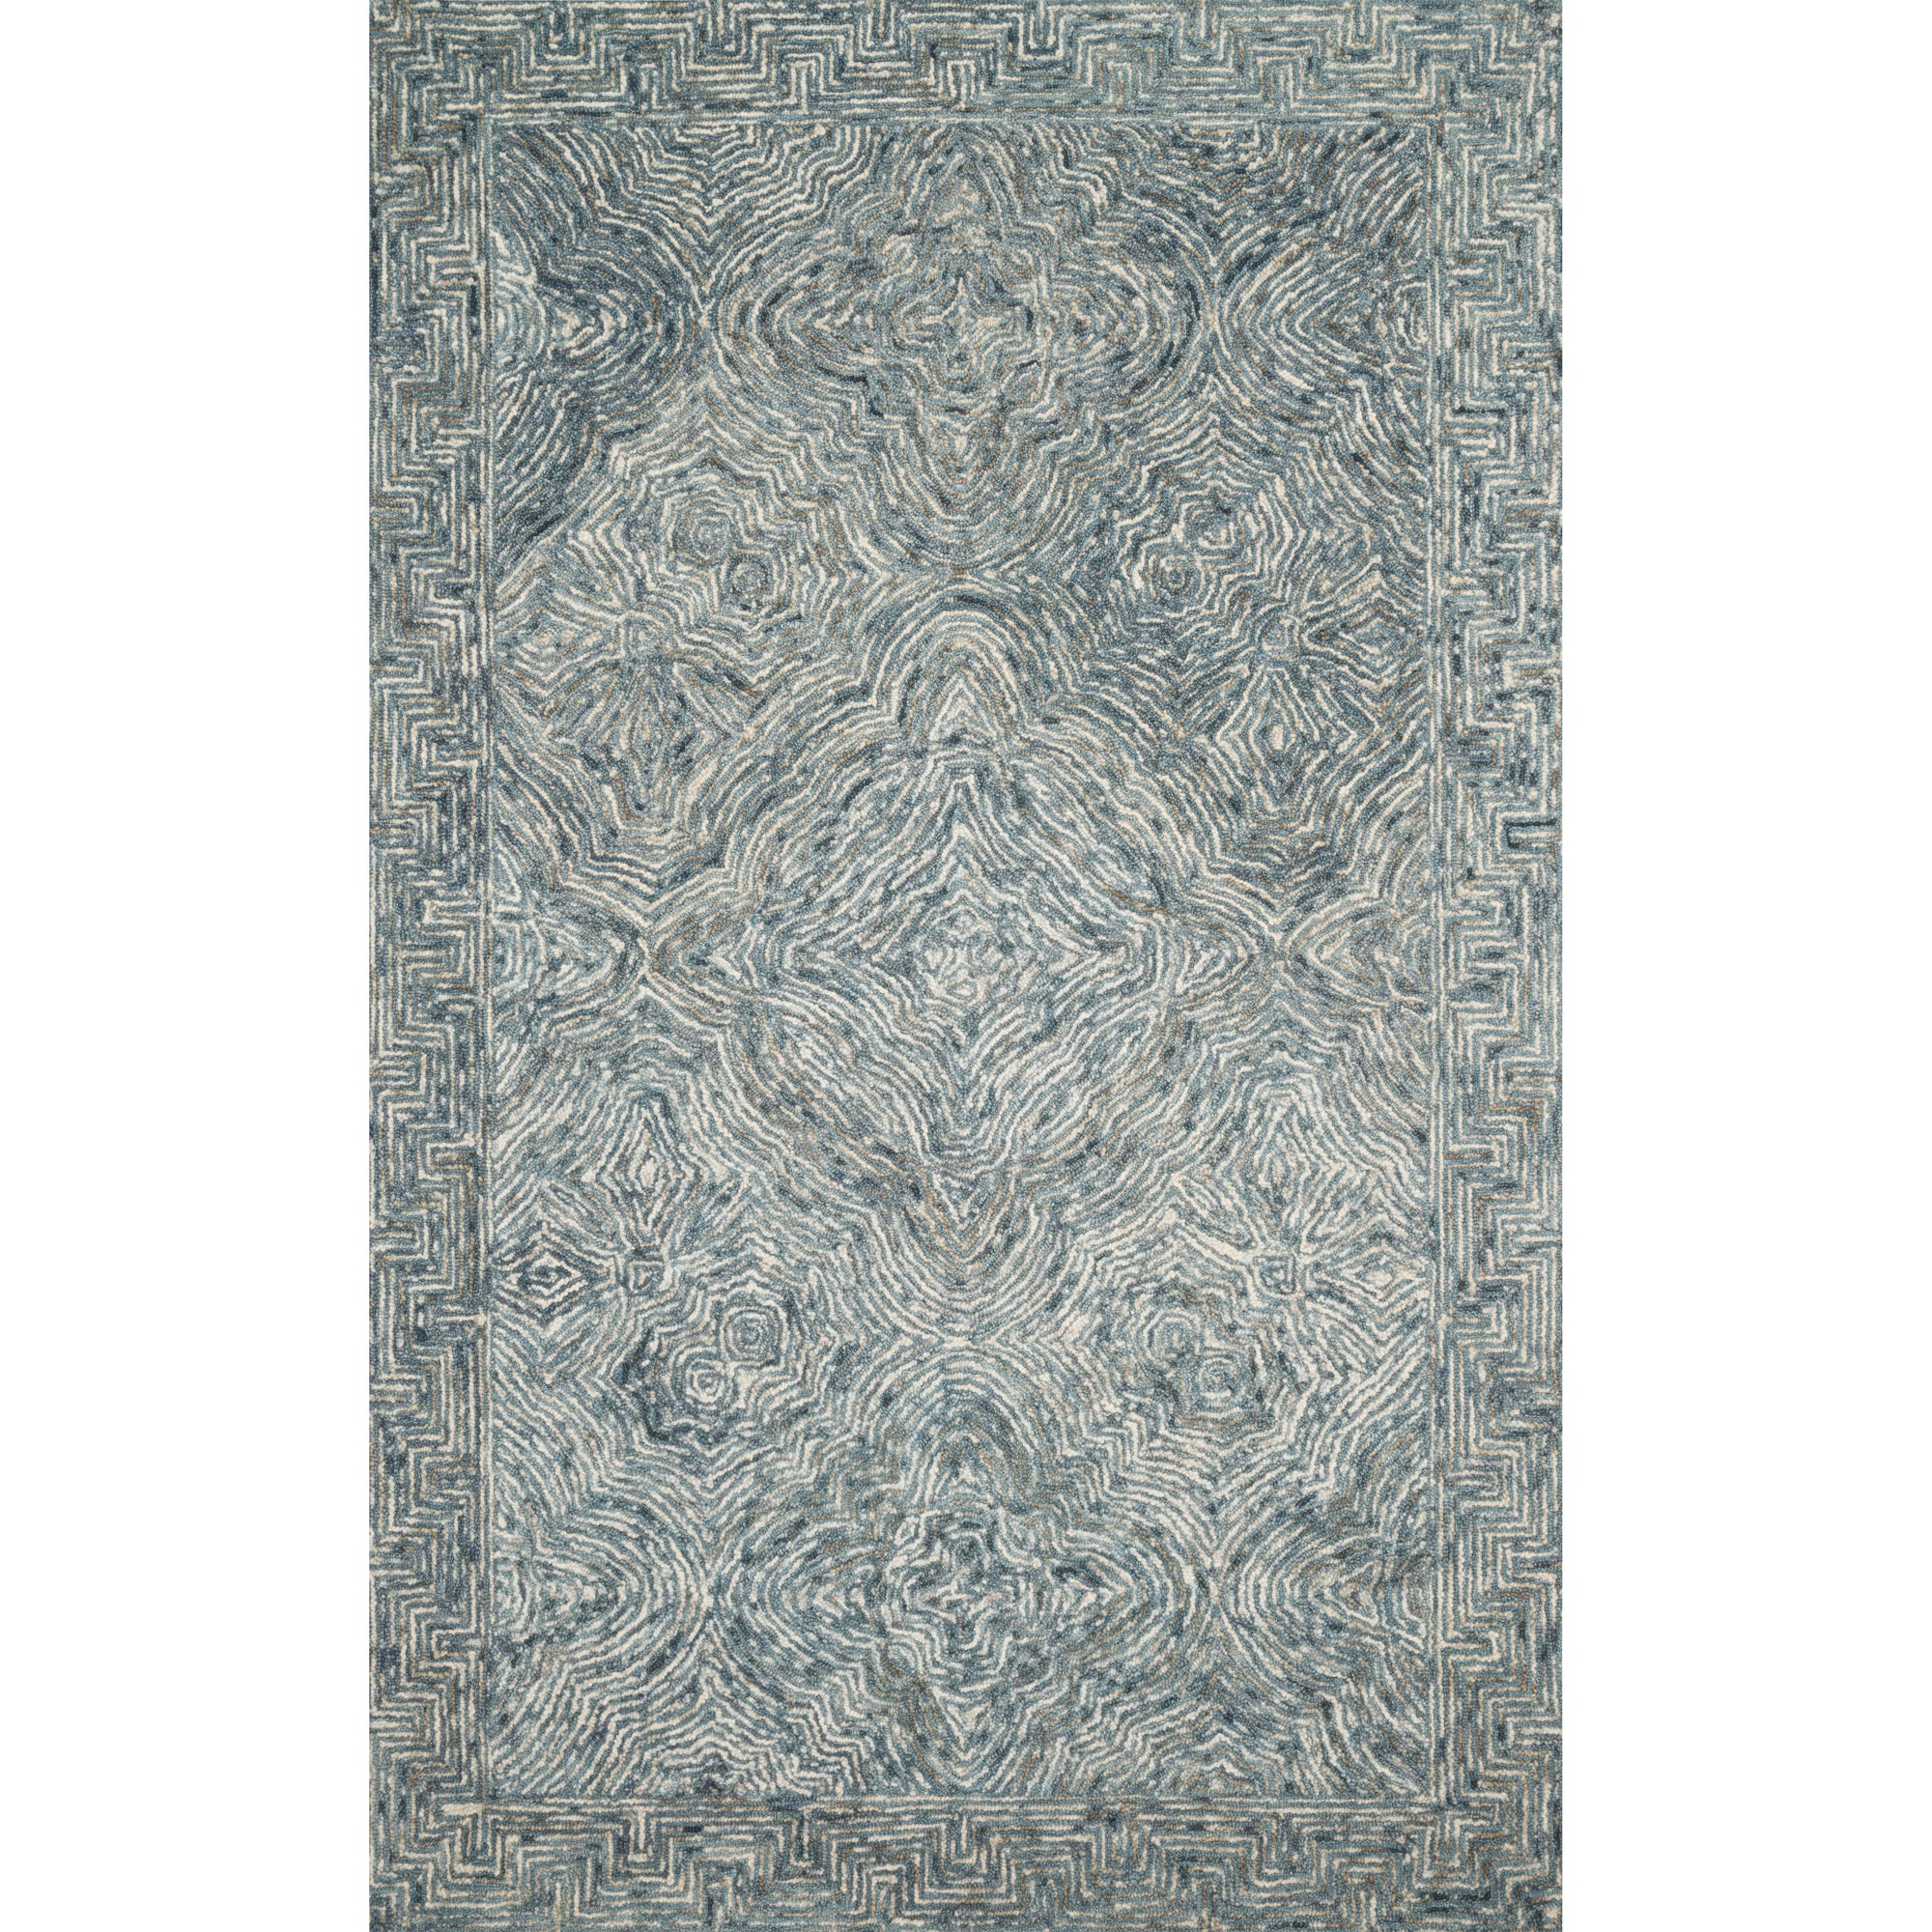 Rugs by Roo Loloi Ziva Denim Area Rug in size 18" x 18" Sample